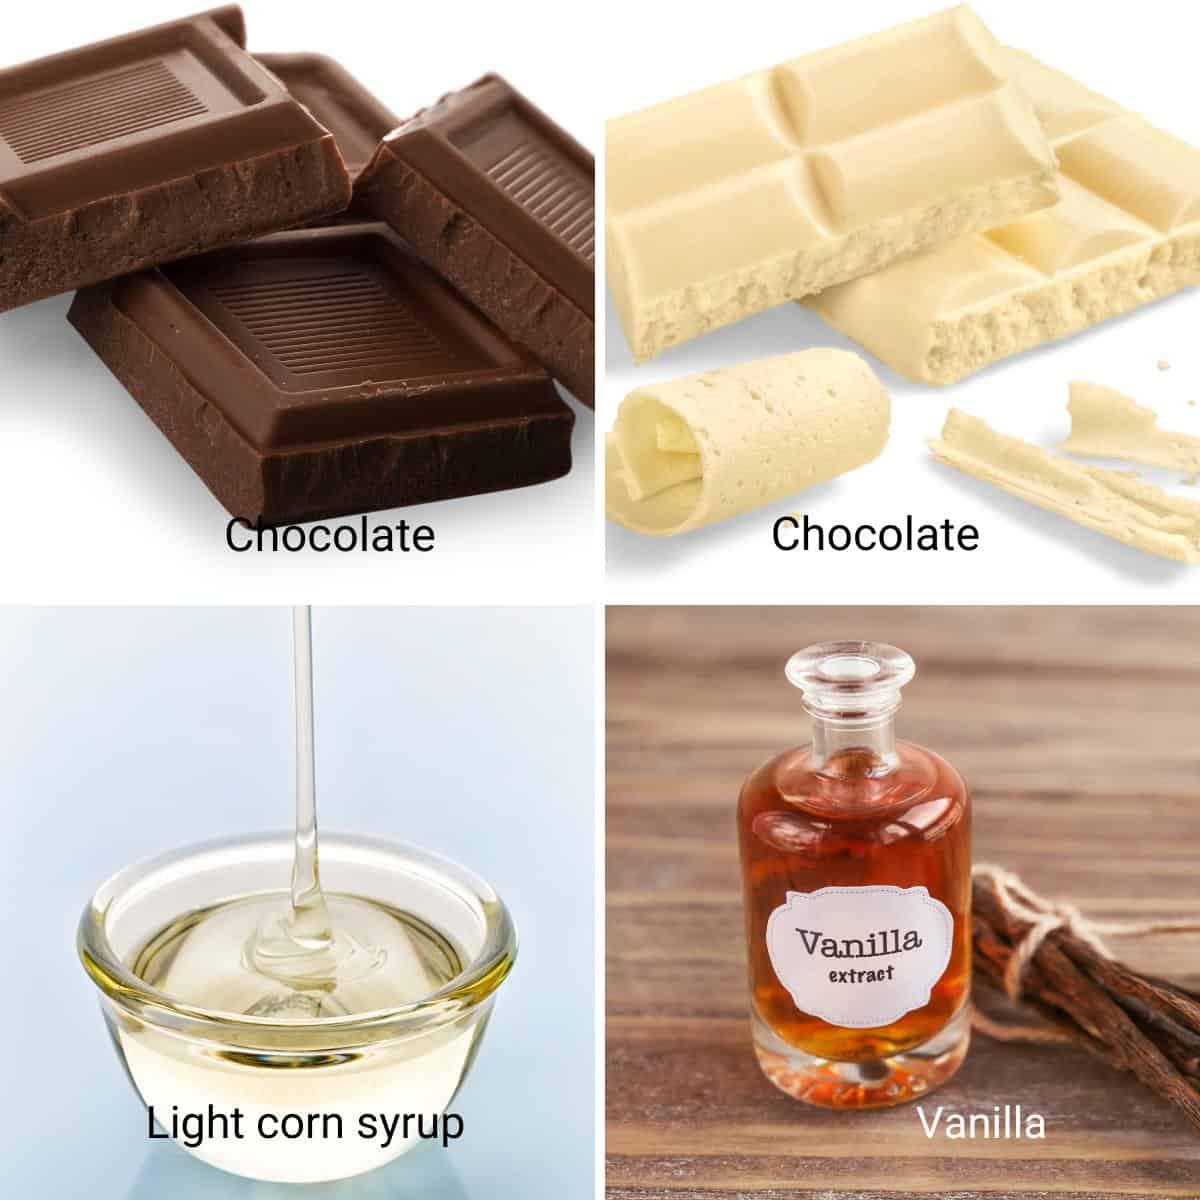 Ingredients for making modeling chocolate.